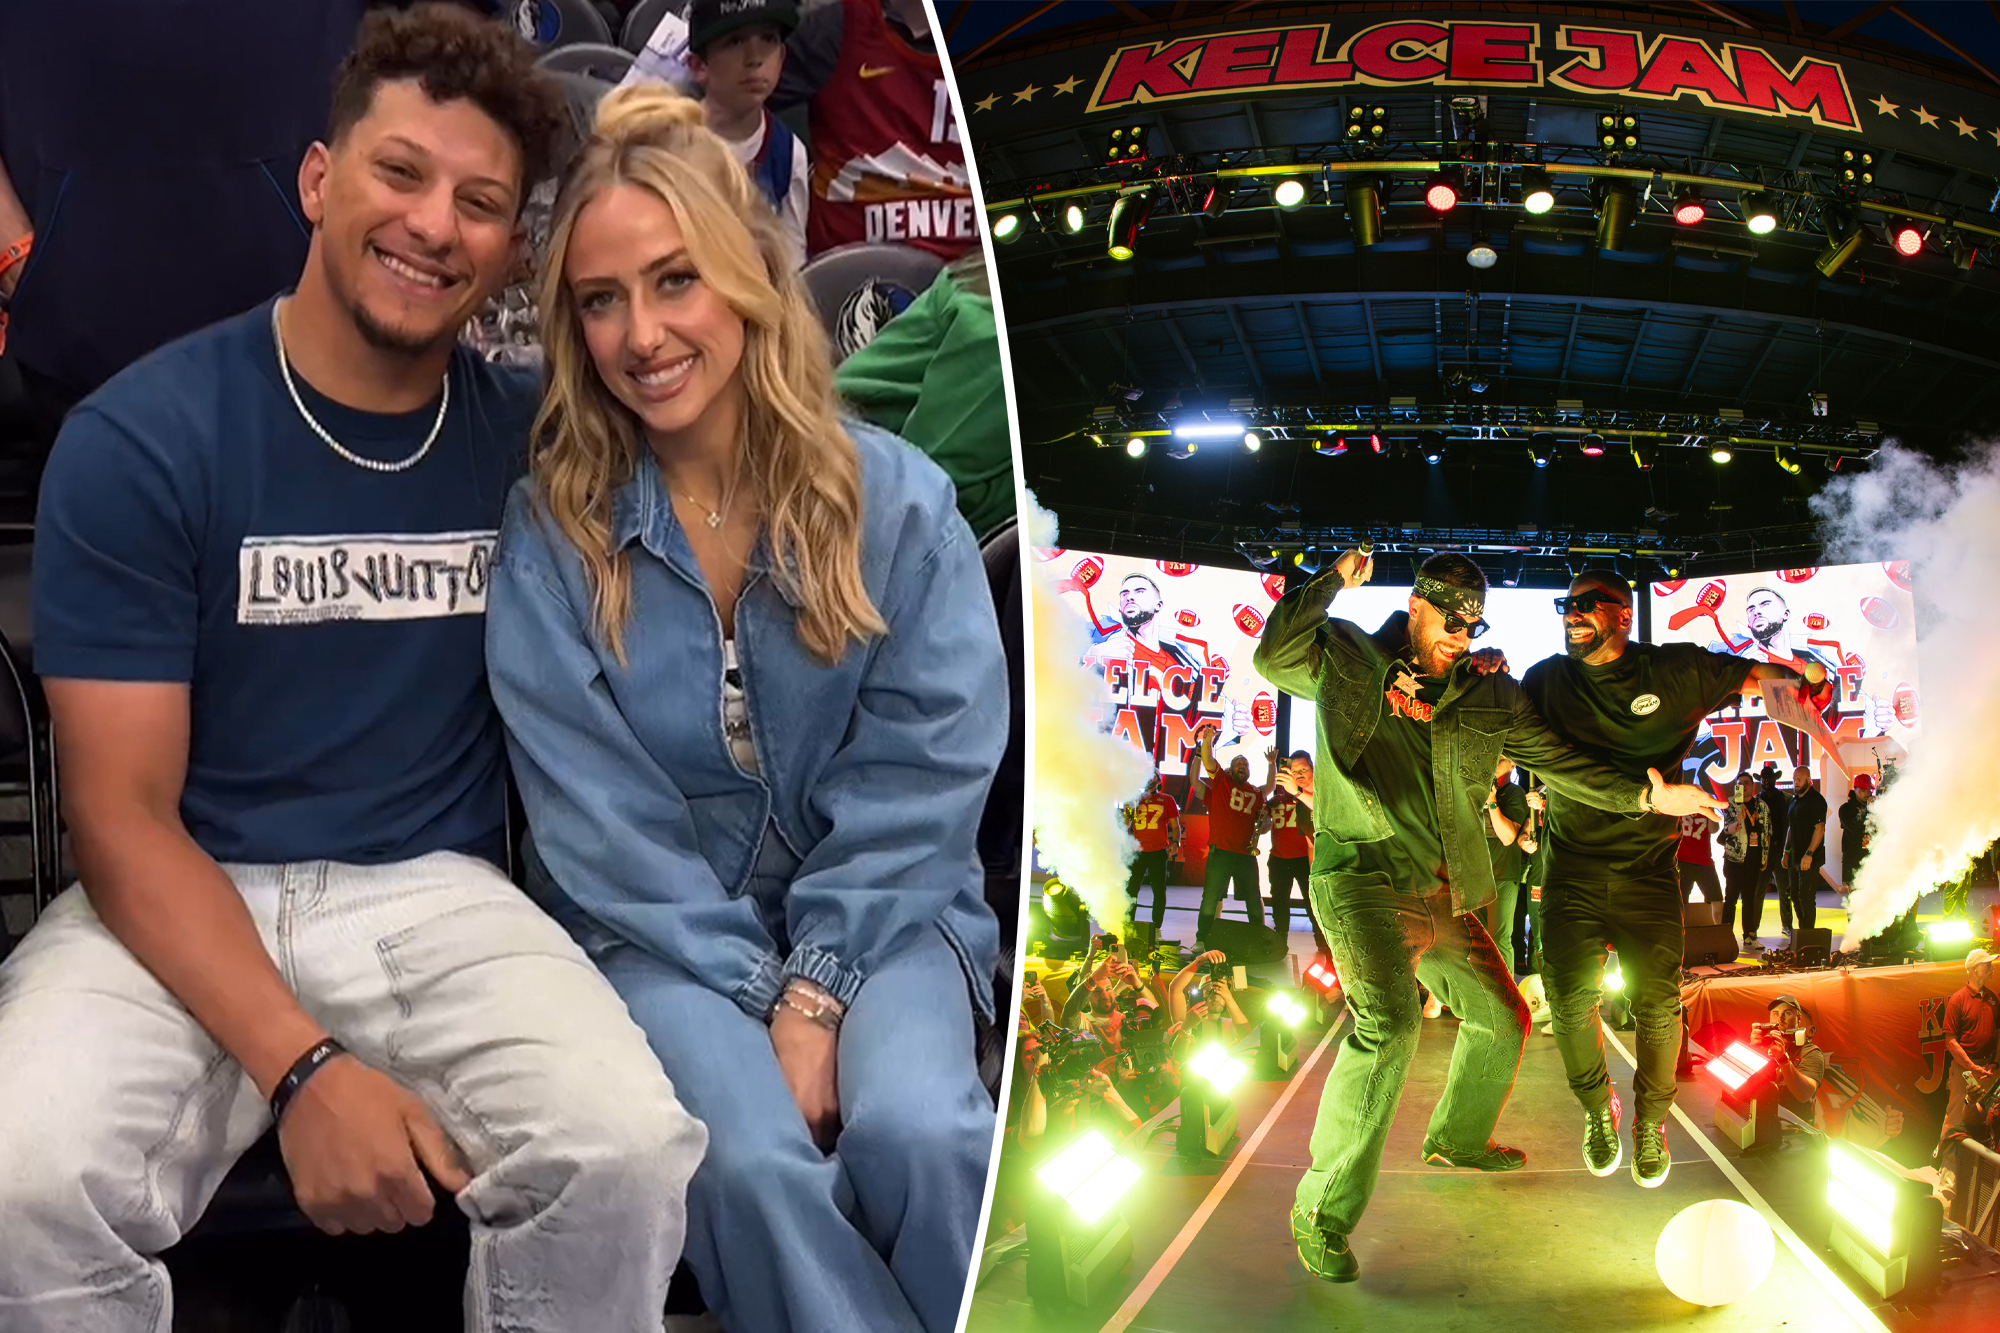 Patrick and Brittany Mahomes Surprise Fans at Kelce Jam